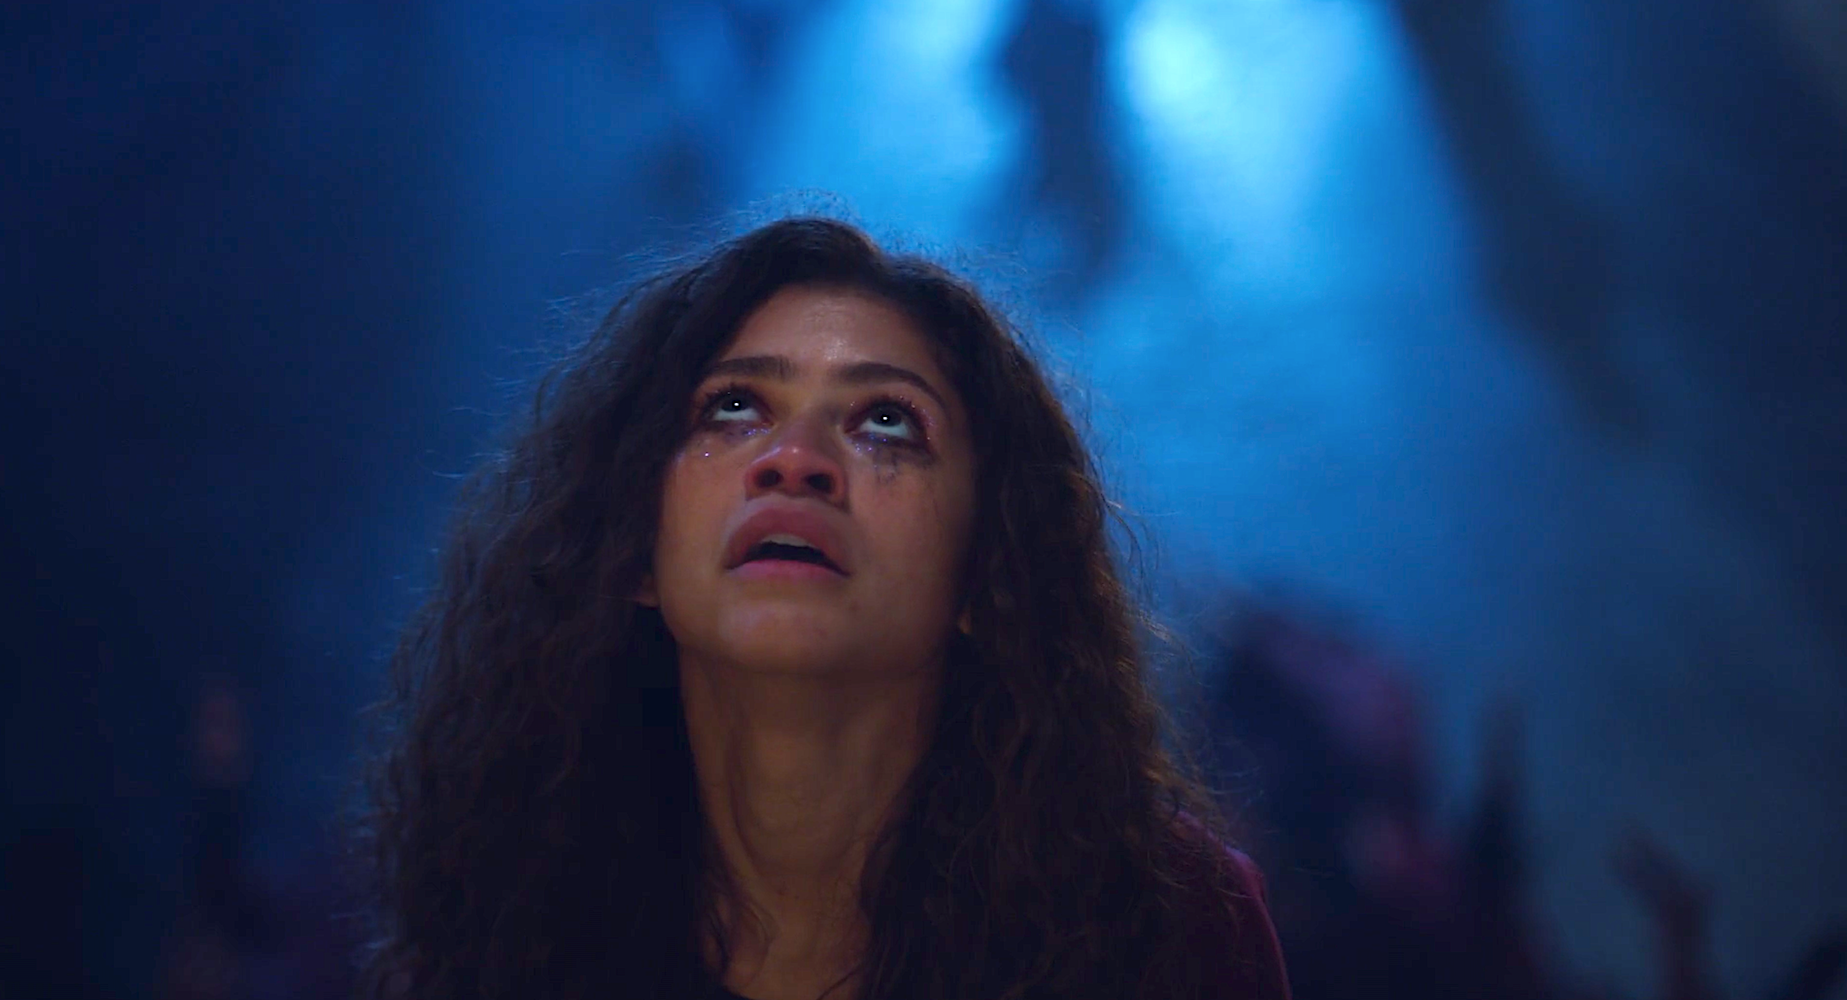 facts about rue from euphoria